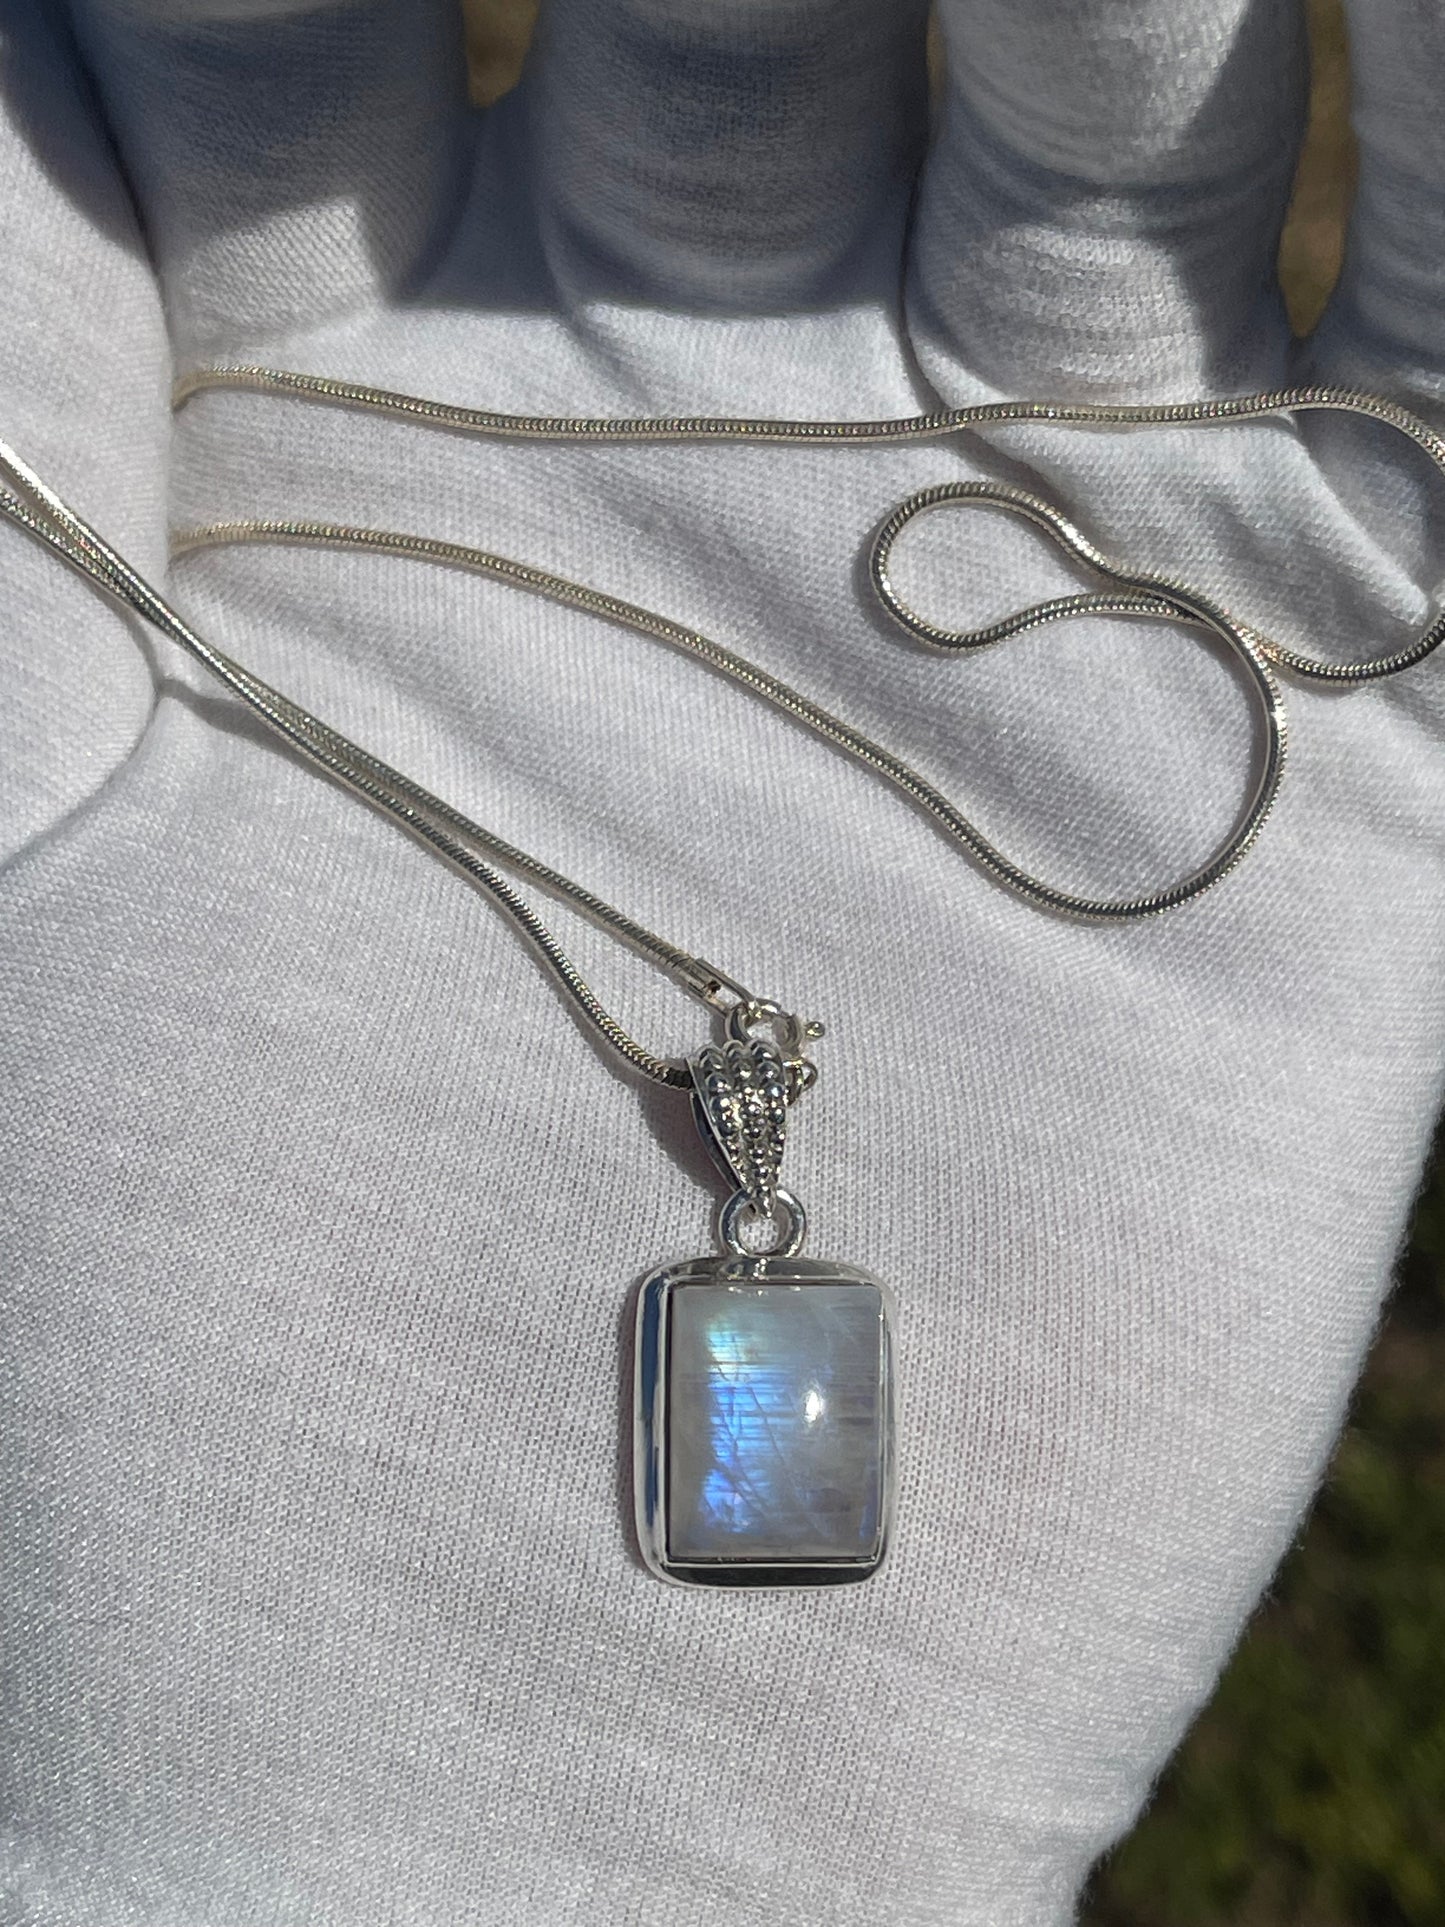 Natural Rainbow Moonstone Emerald Cabochon Cut Sterling Silver Pendant & Necklace (20 inches)